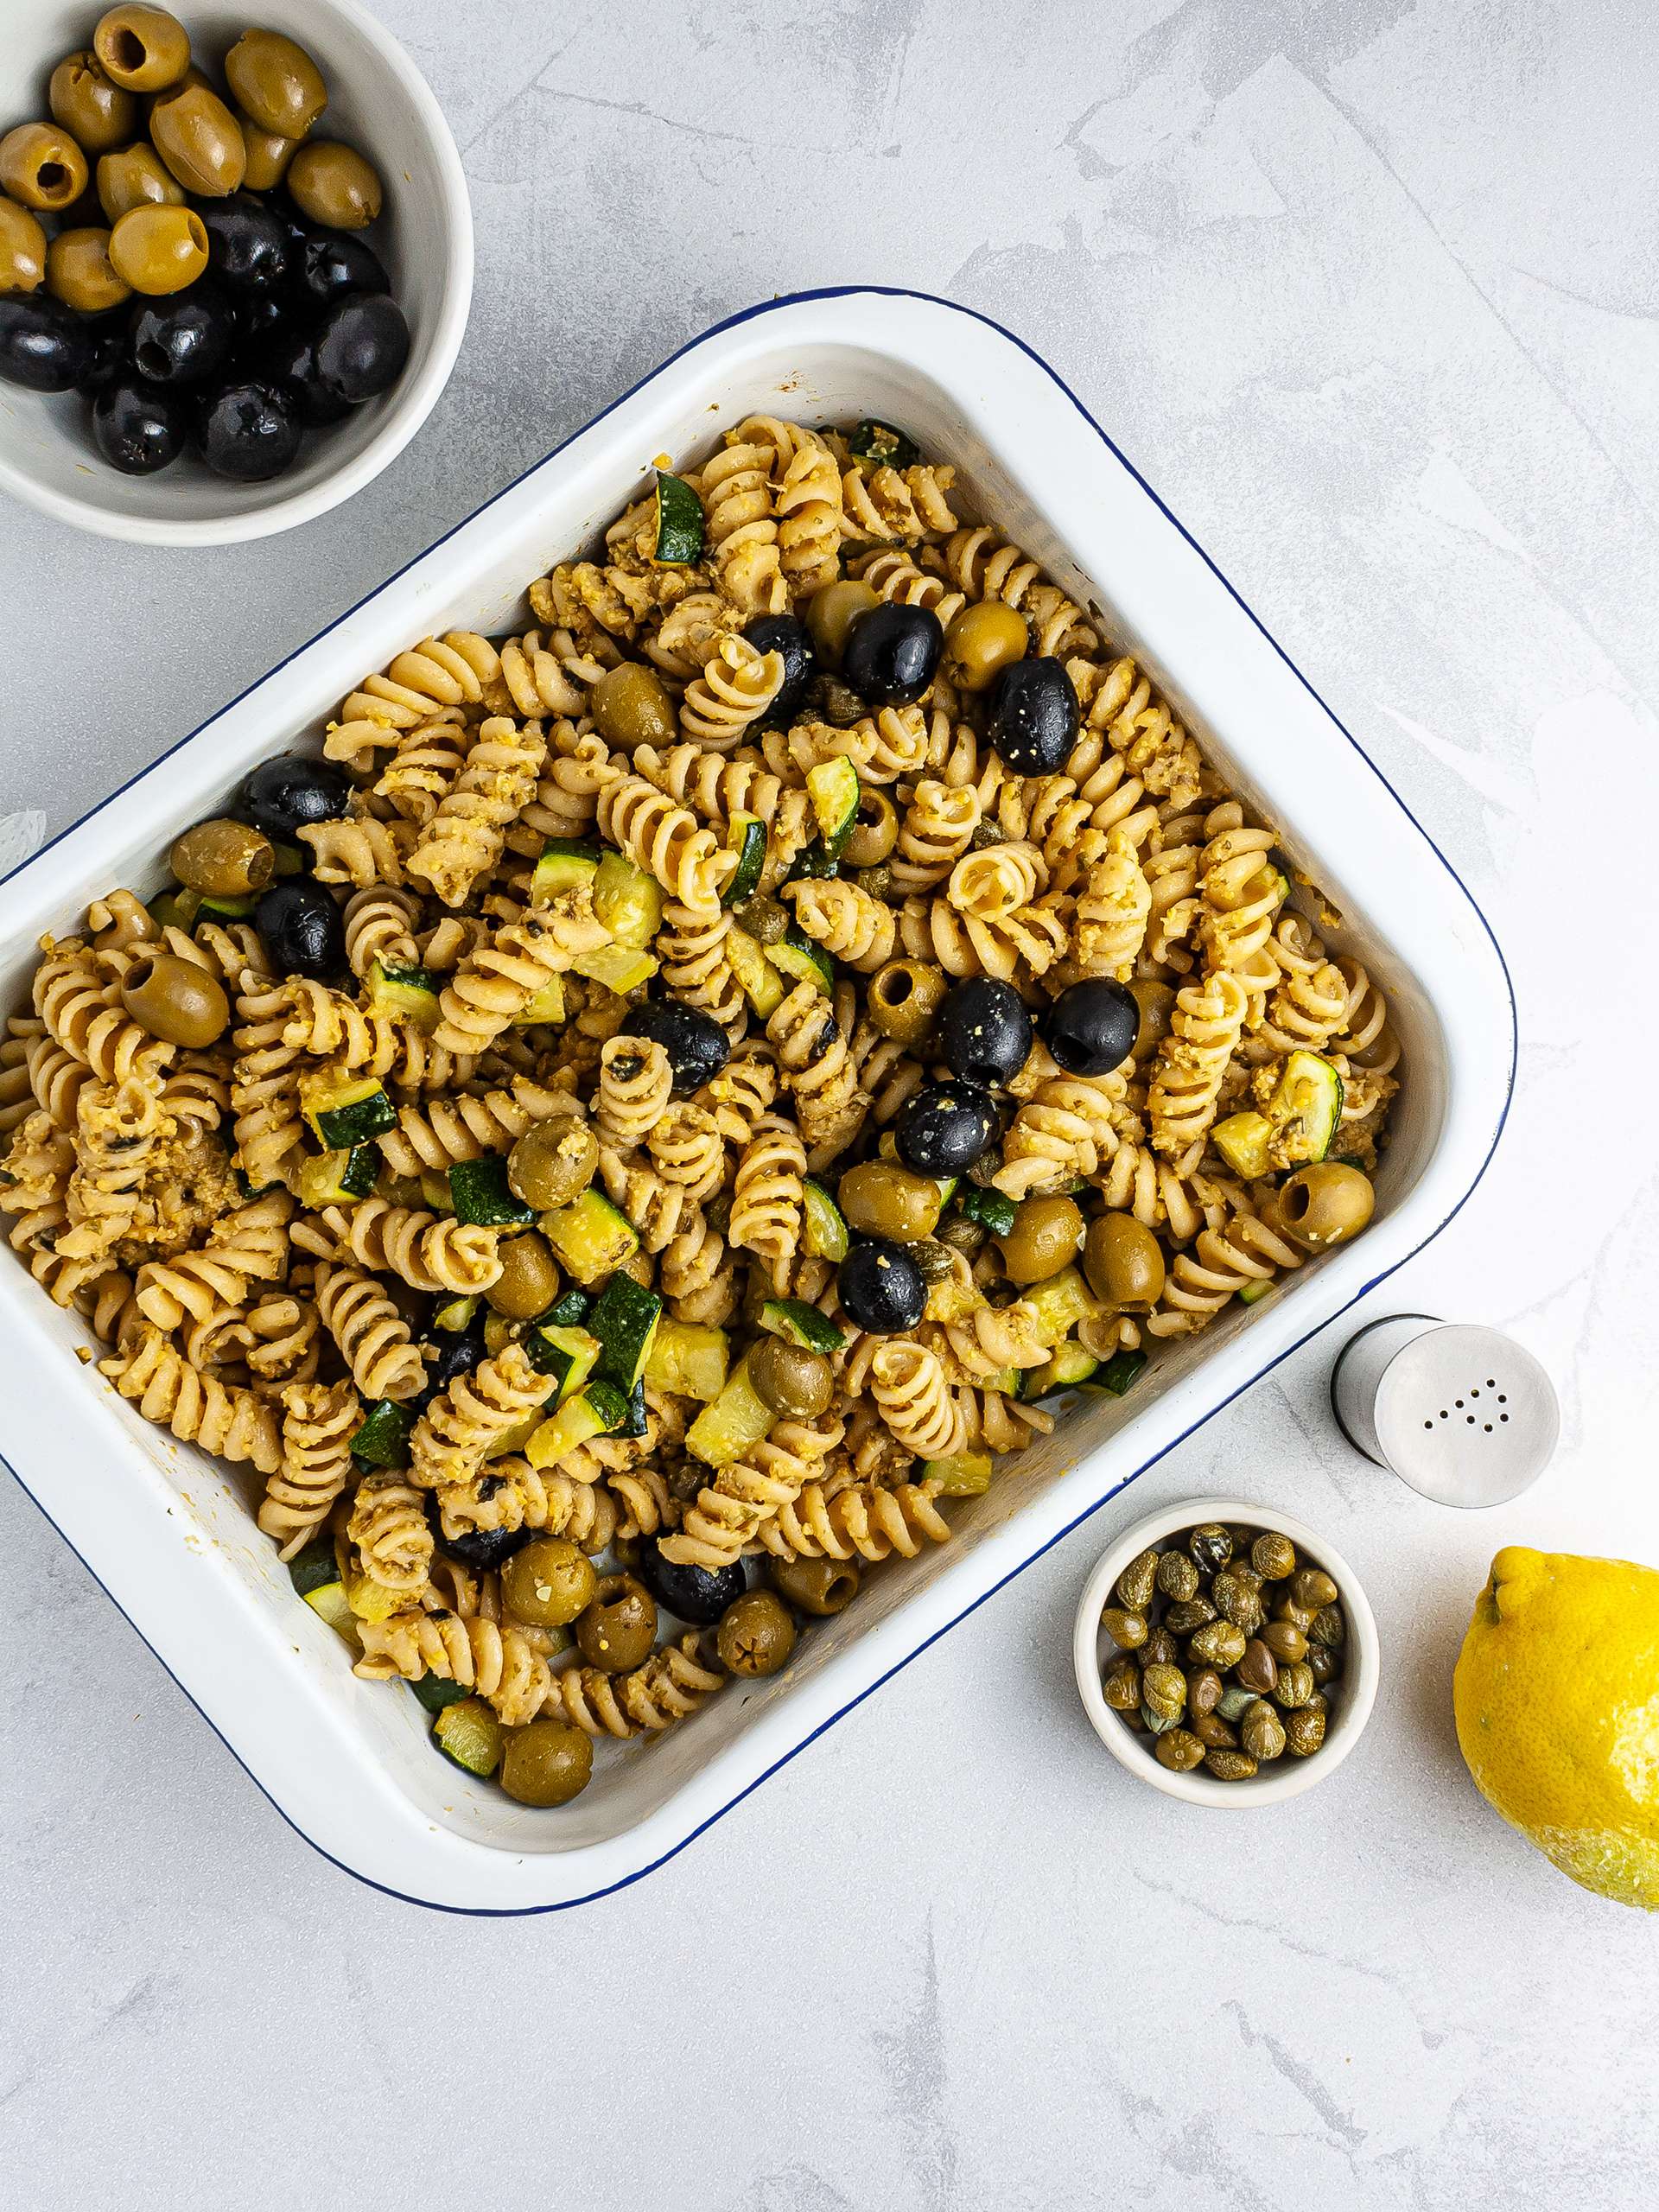 Pasta salad with olives, capers and lemon zest